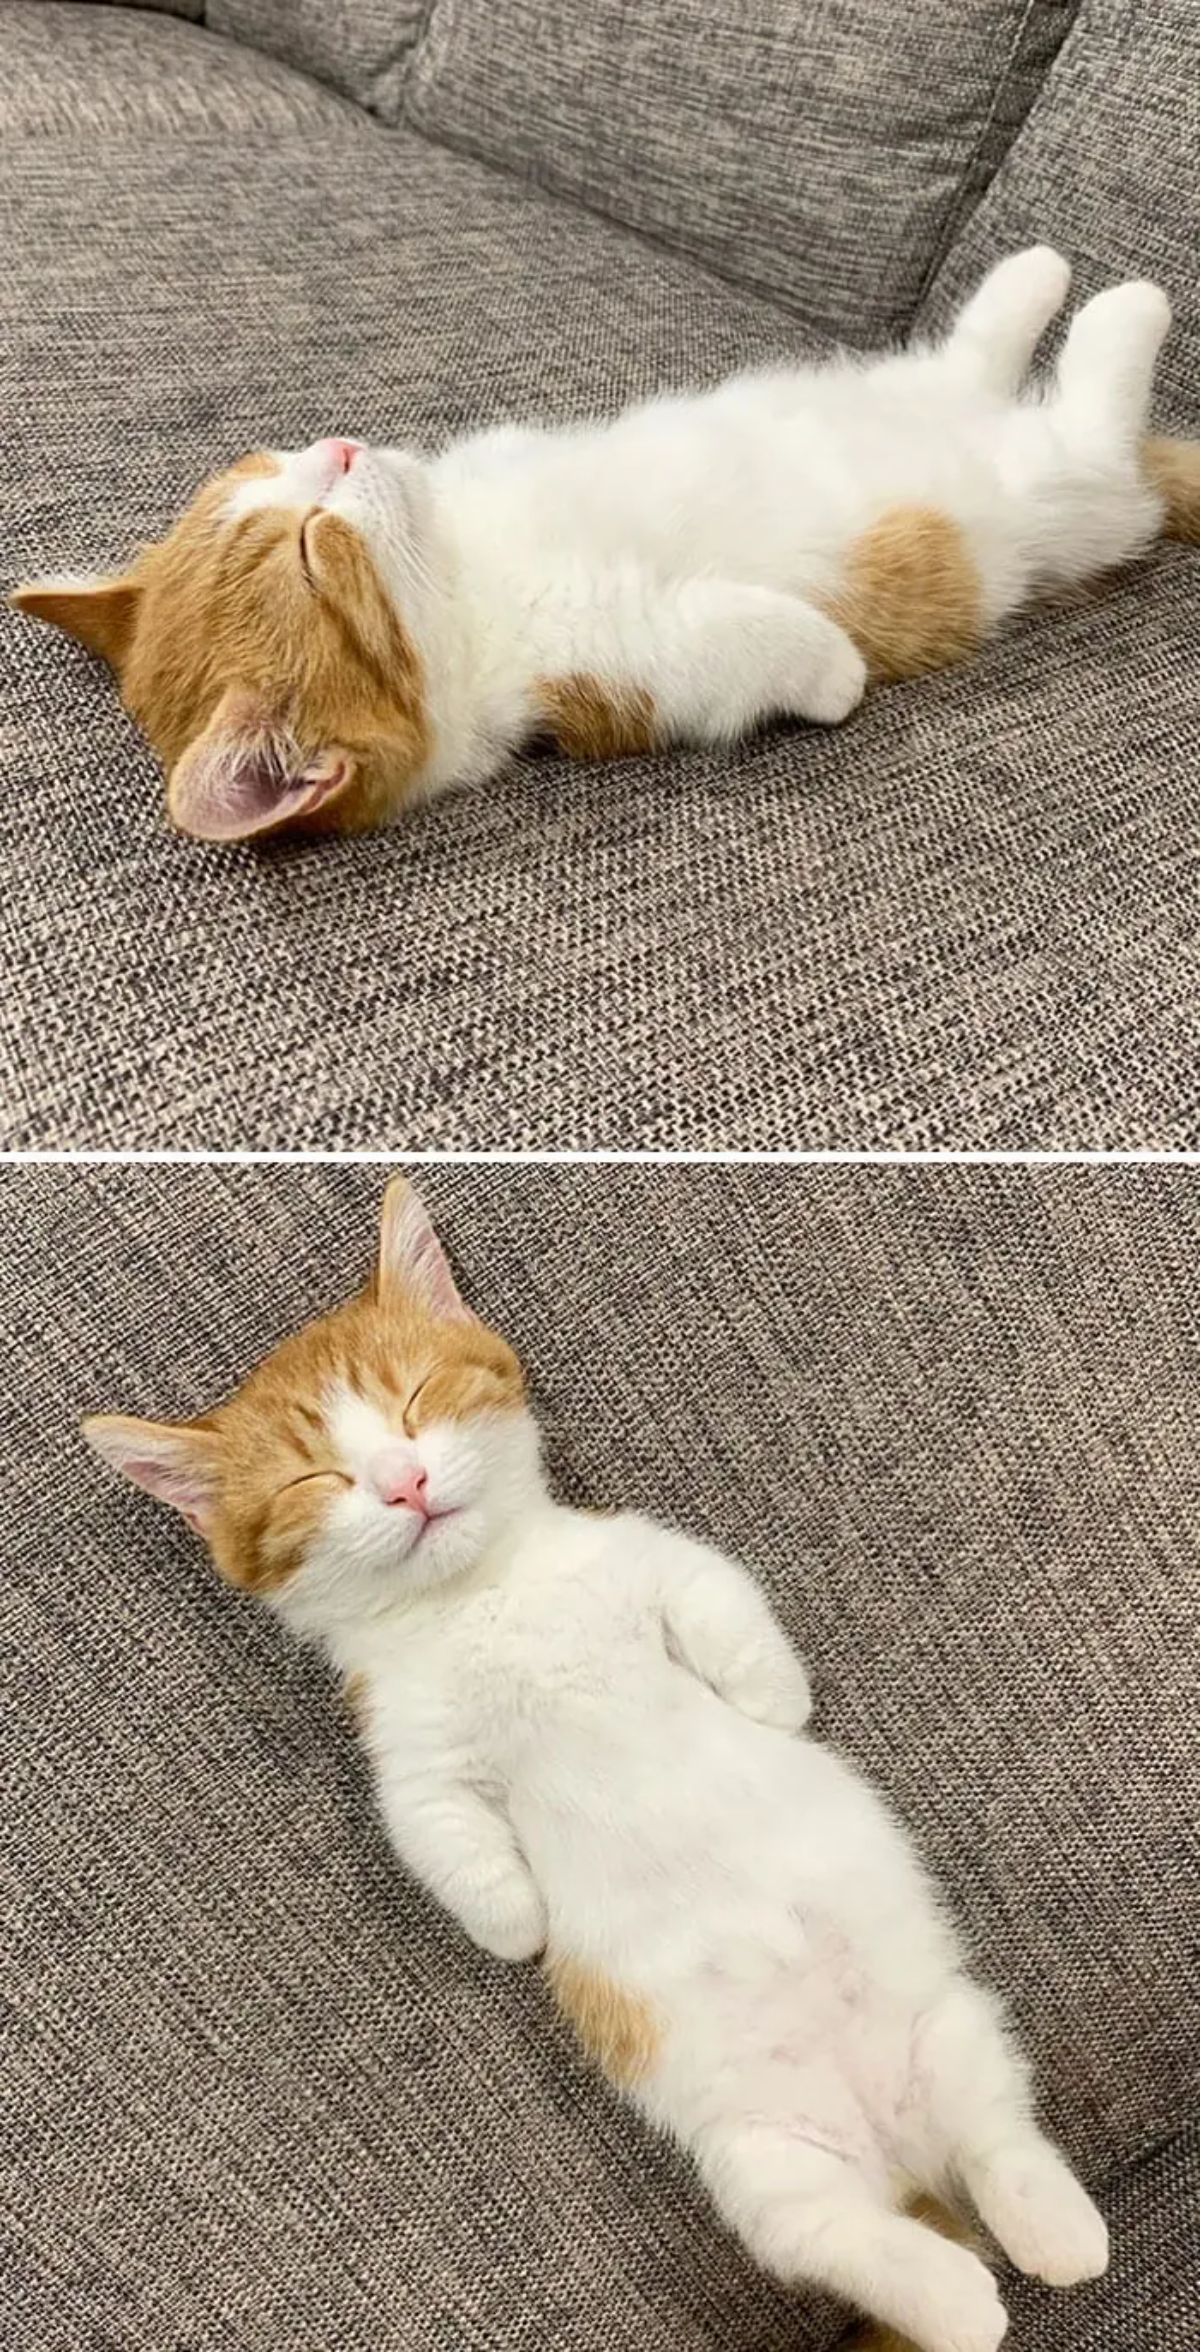 2 photos of an orange and a white kitten sleeping belly up on a grey sofa with the front legs on either side